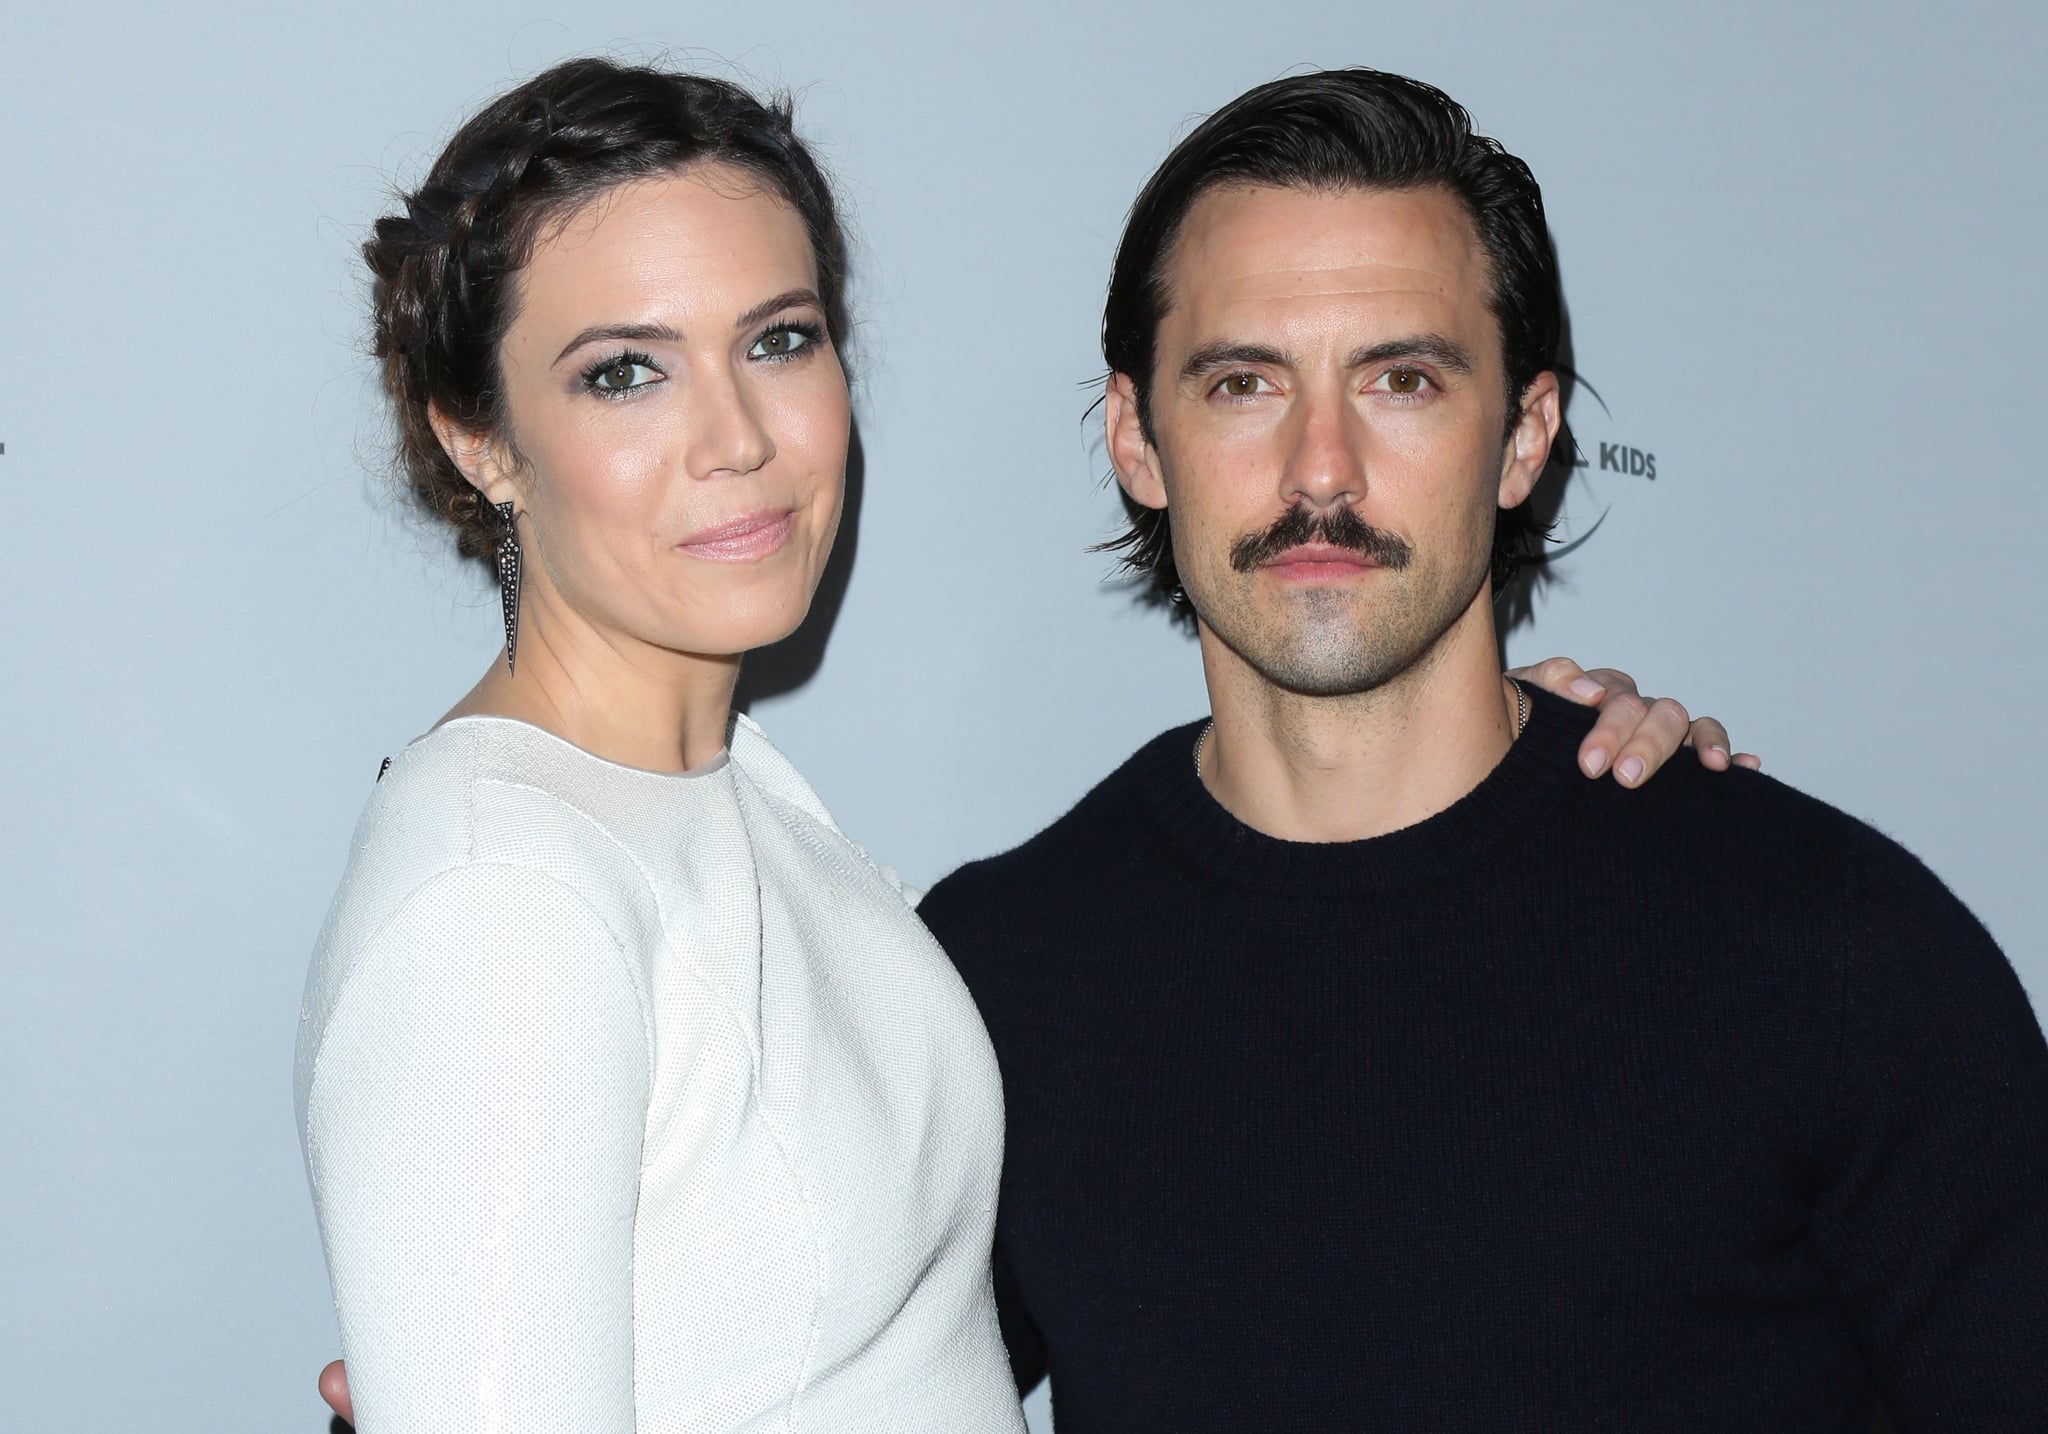 LOS ANGELES, CA - NOVEMBER 13:  Actress Mandy Moore (L) and Milo Ventimiglia (R) attend NBCUniversal's press junket at Beauty & Essex on November 13, 2017 in Los Angeles, California.  (Photo by Paul Archuleta/FilmMagic)